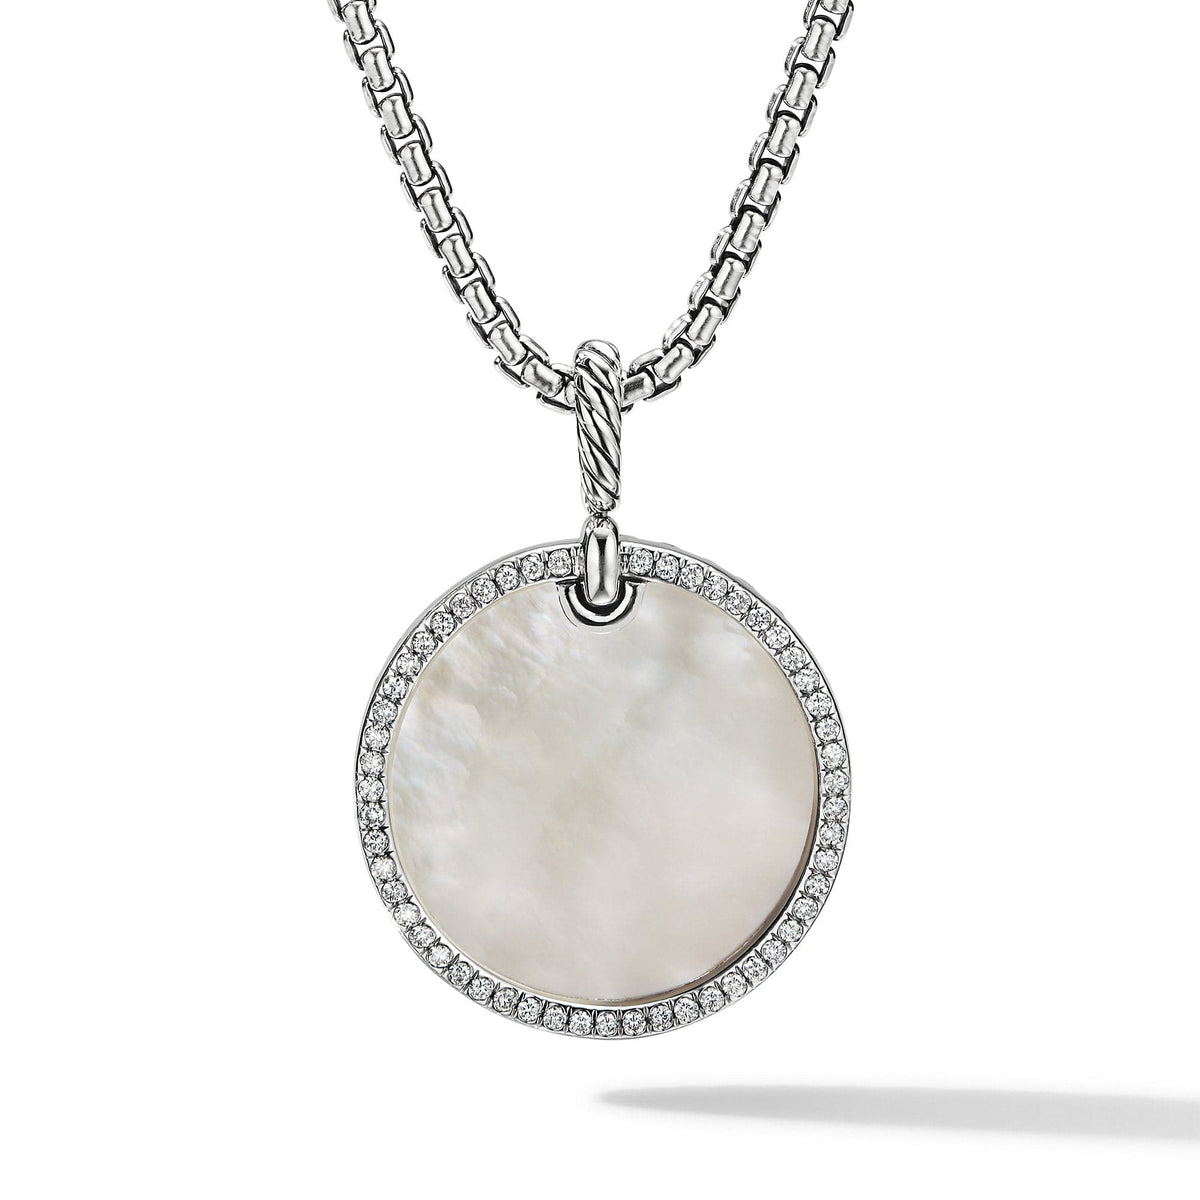 DY Elements Disc Pendant with Mother of Pearl and Pavé Diamond Rim